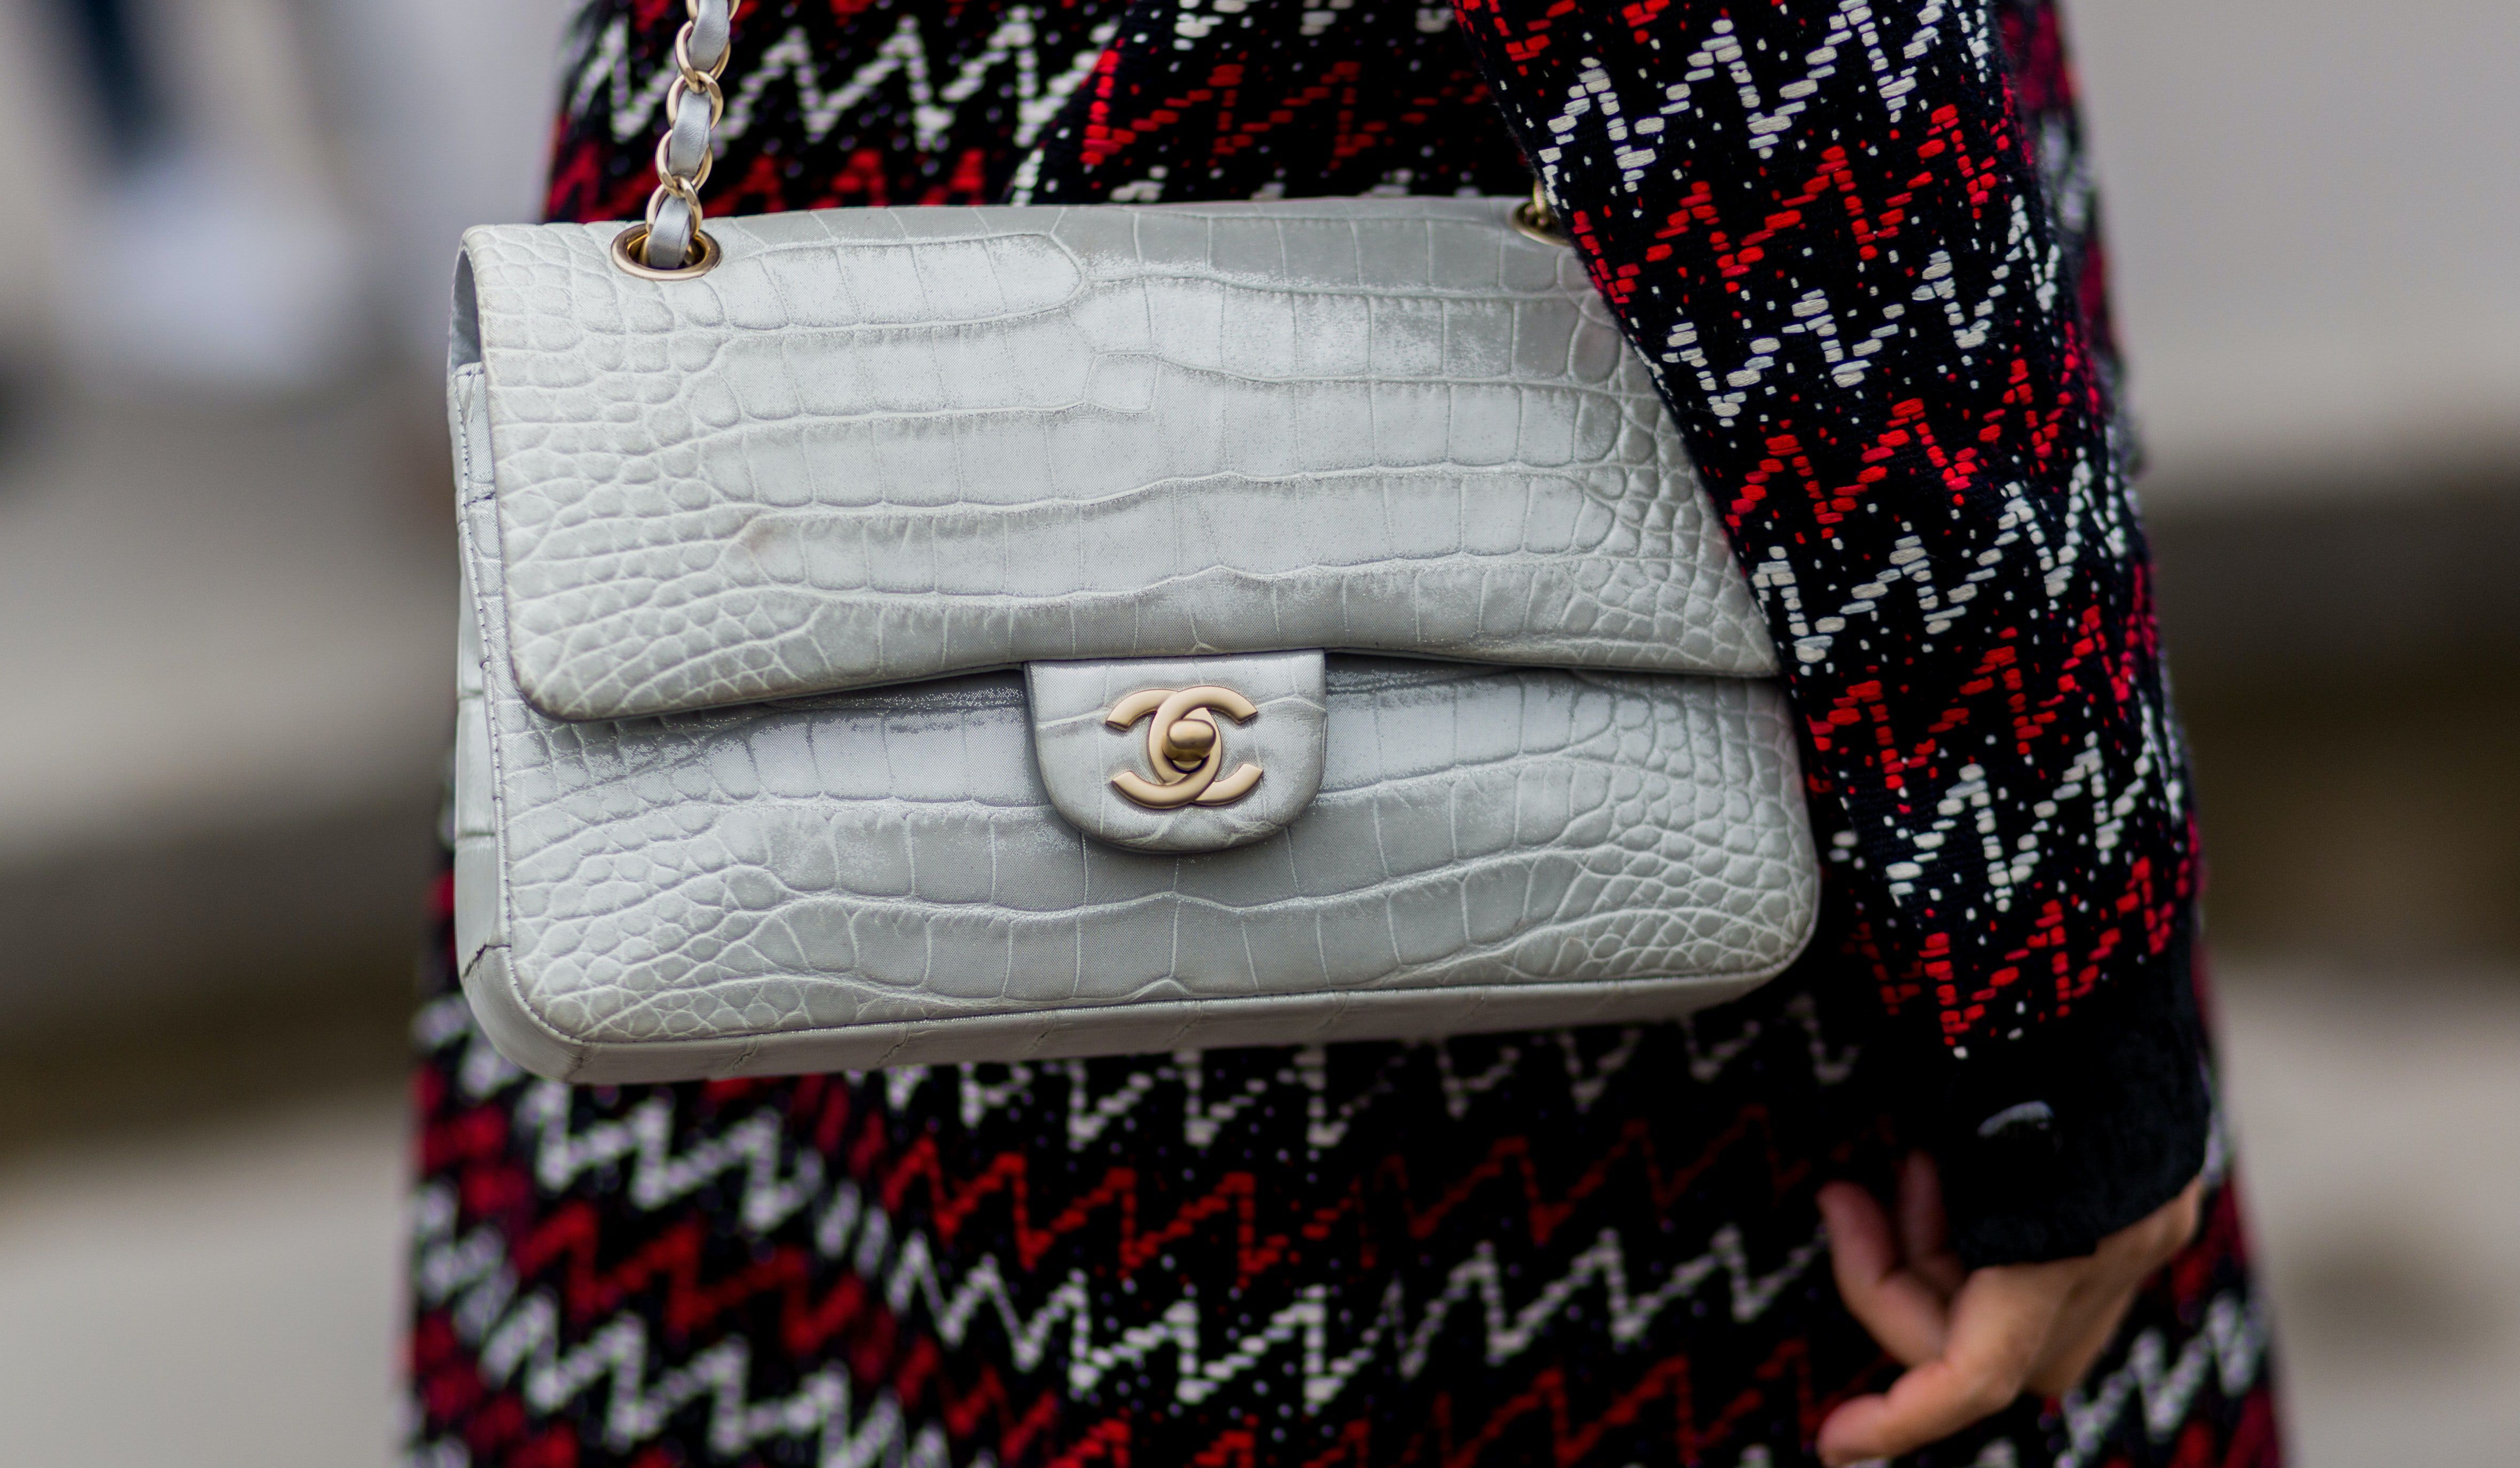 Chanel Is Aiming for Hermes Status With Handbag Price Hikes